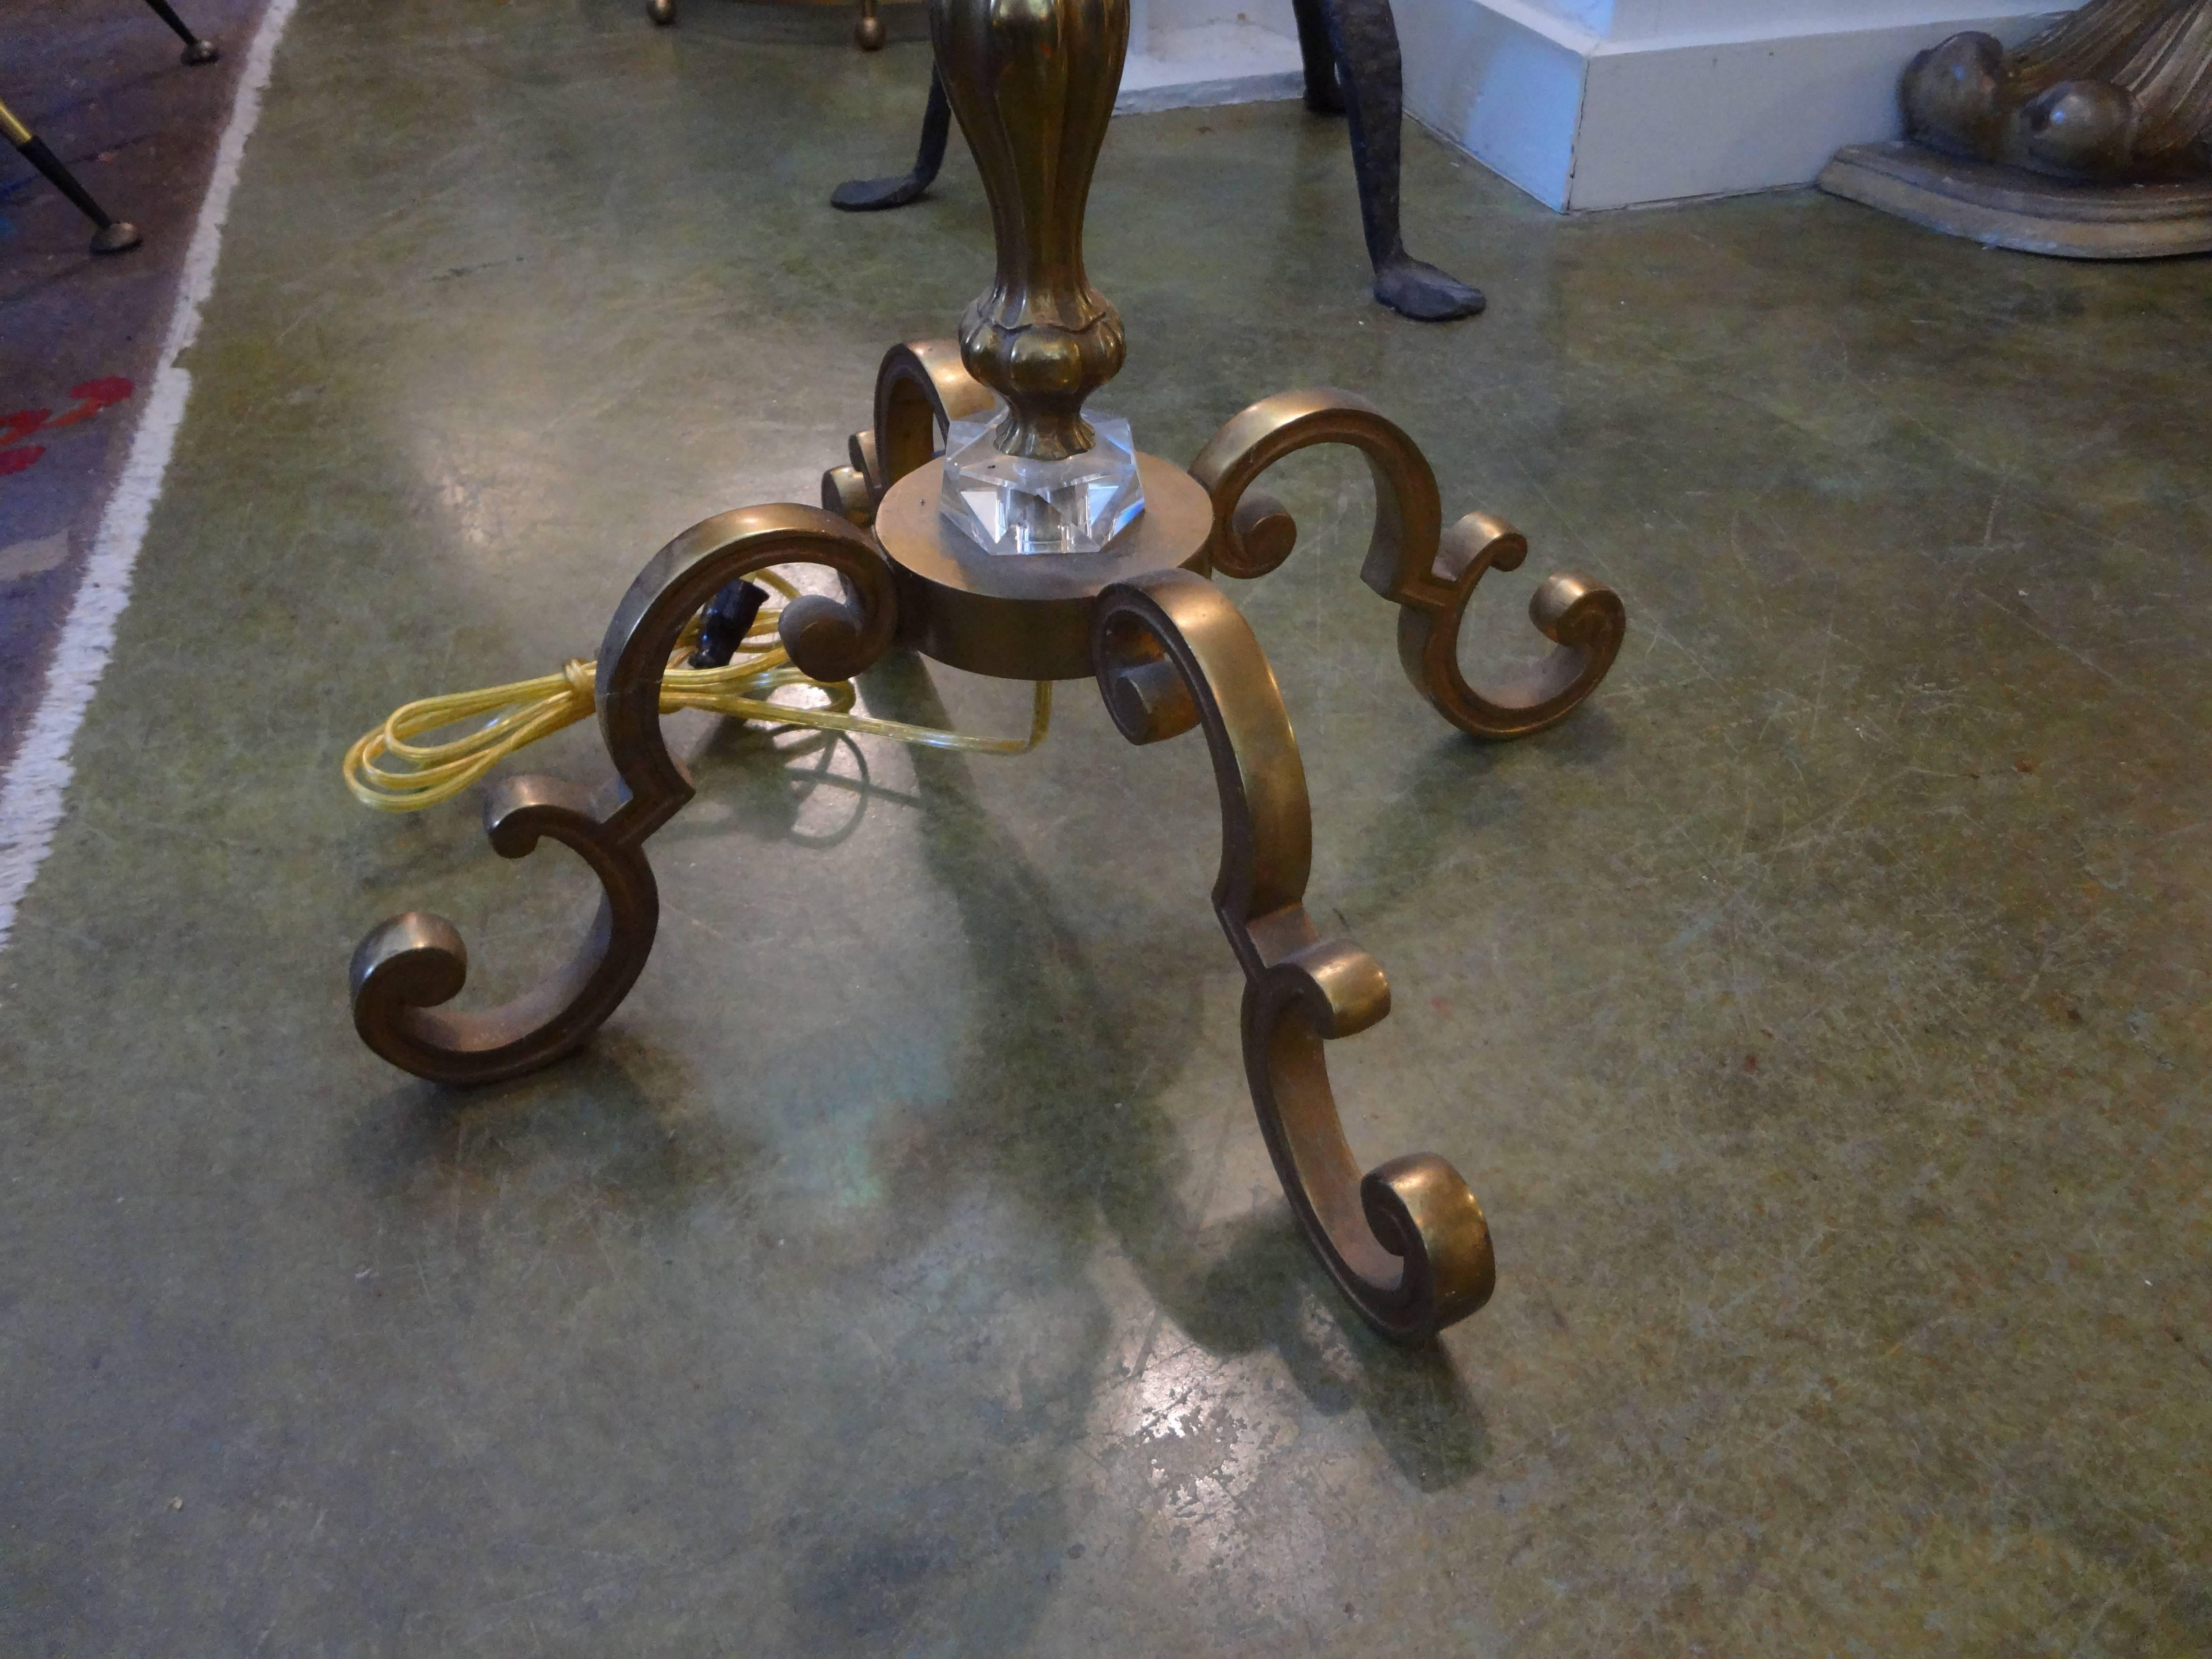 Midcentury French brass and glass floor lamp inspired by Jacques Adnet.
Stylish Jacques Adnet style French bronze or brass and glass floor lamp. Newly wired for U.S. market. (Shade as-is, is not included in this sale, best to select a new one).